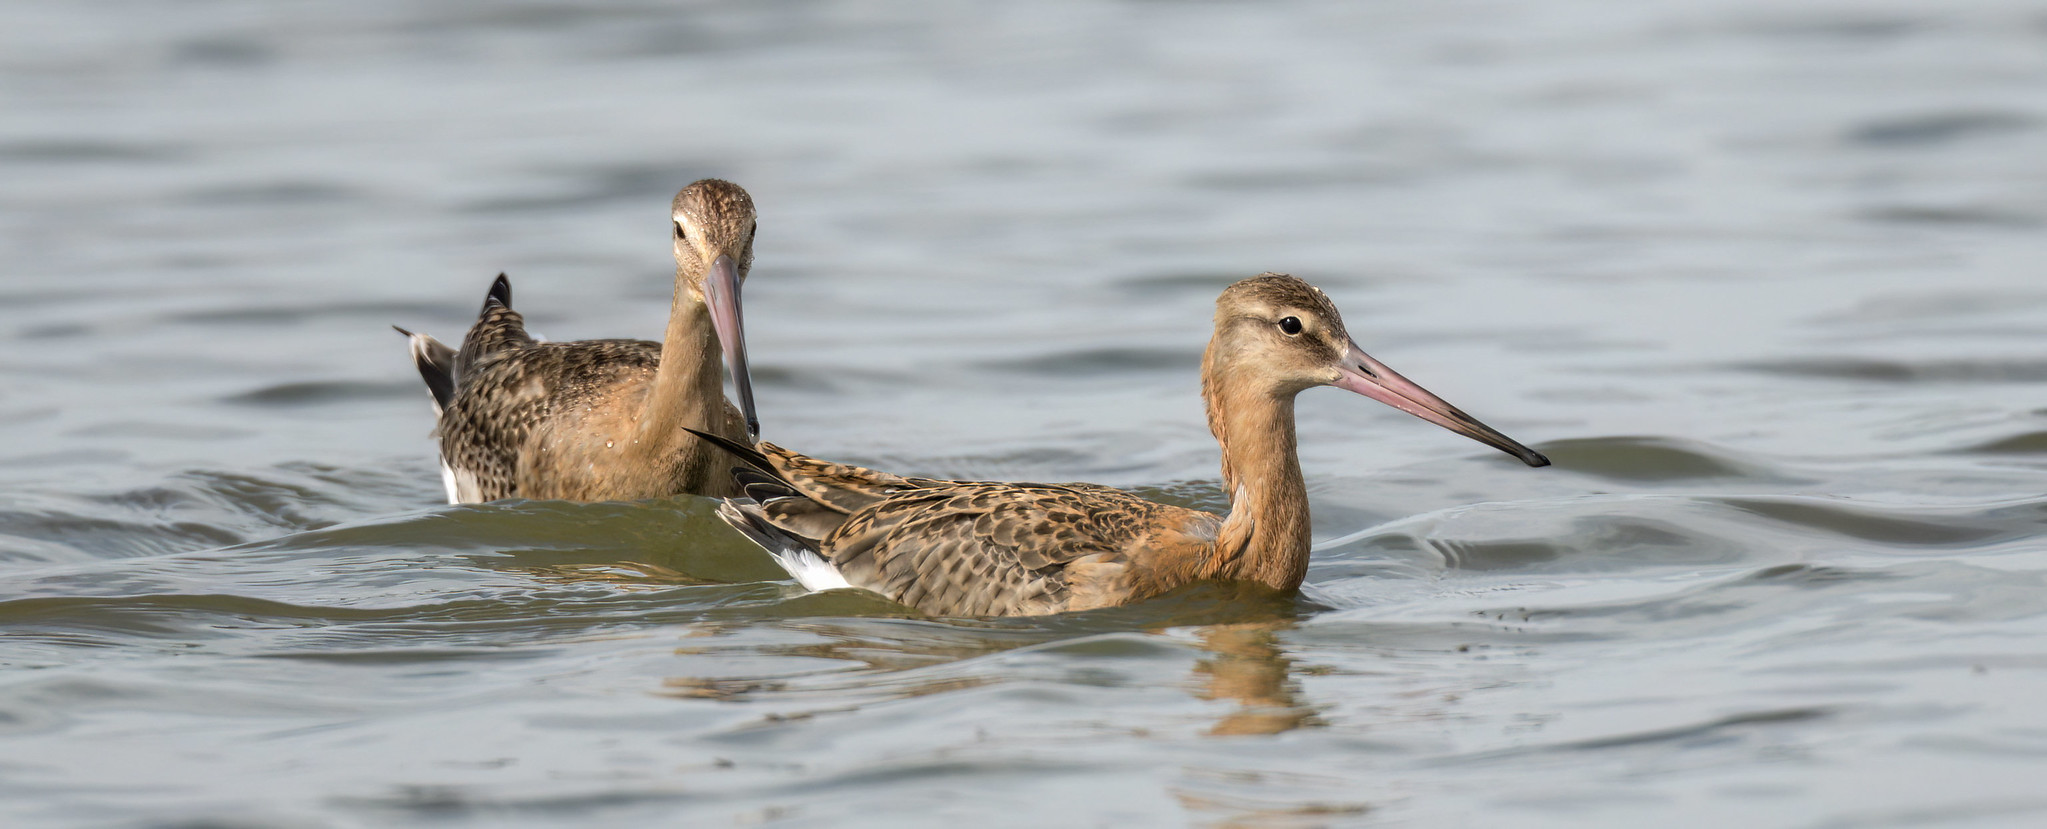 Black-tailed Godwits - "...this water is getting deep here..."